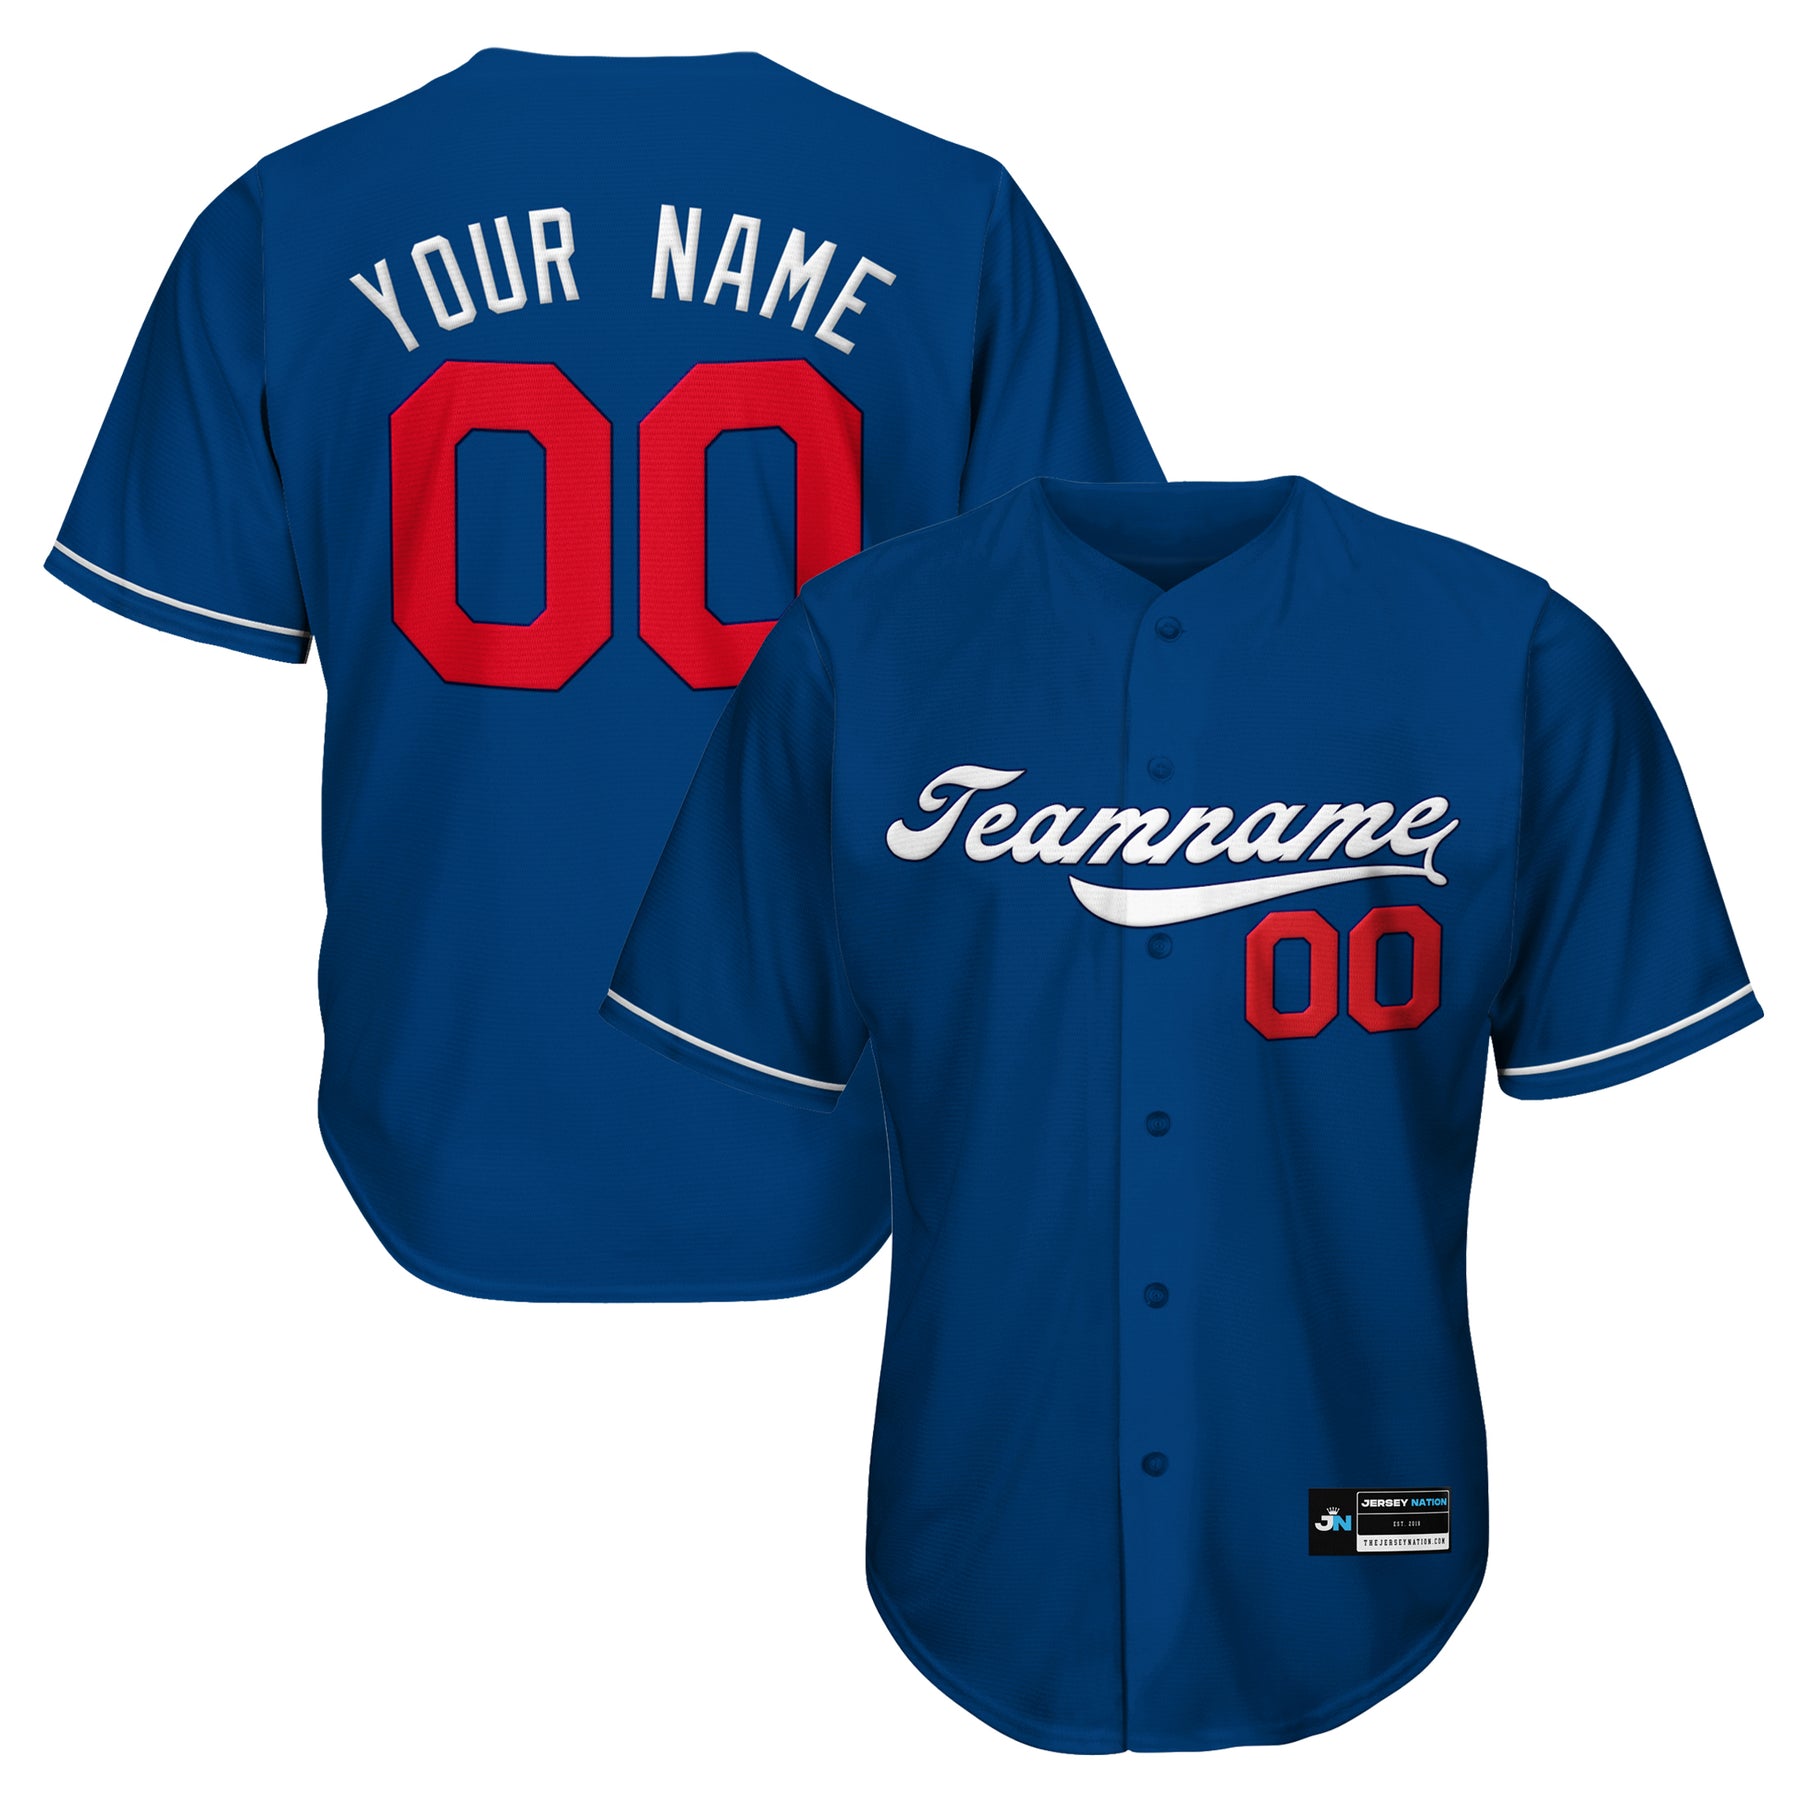 red and blue baseball uniforms